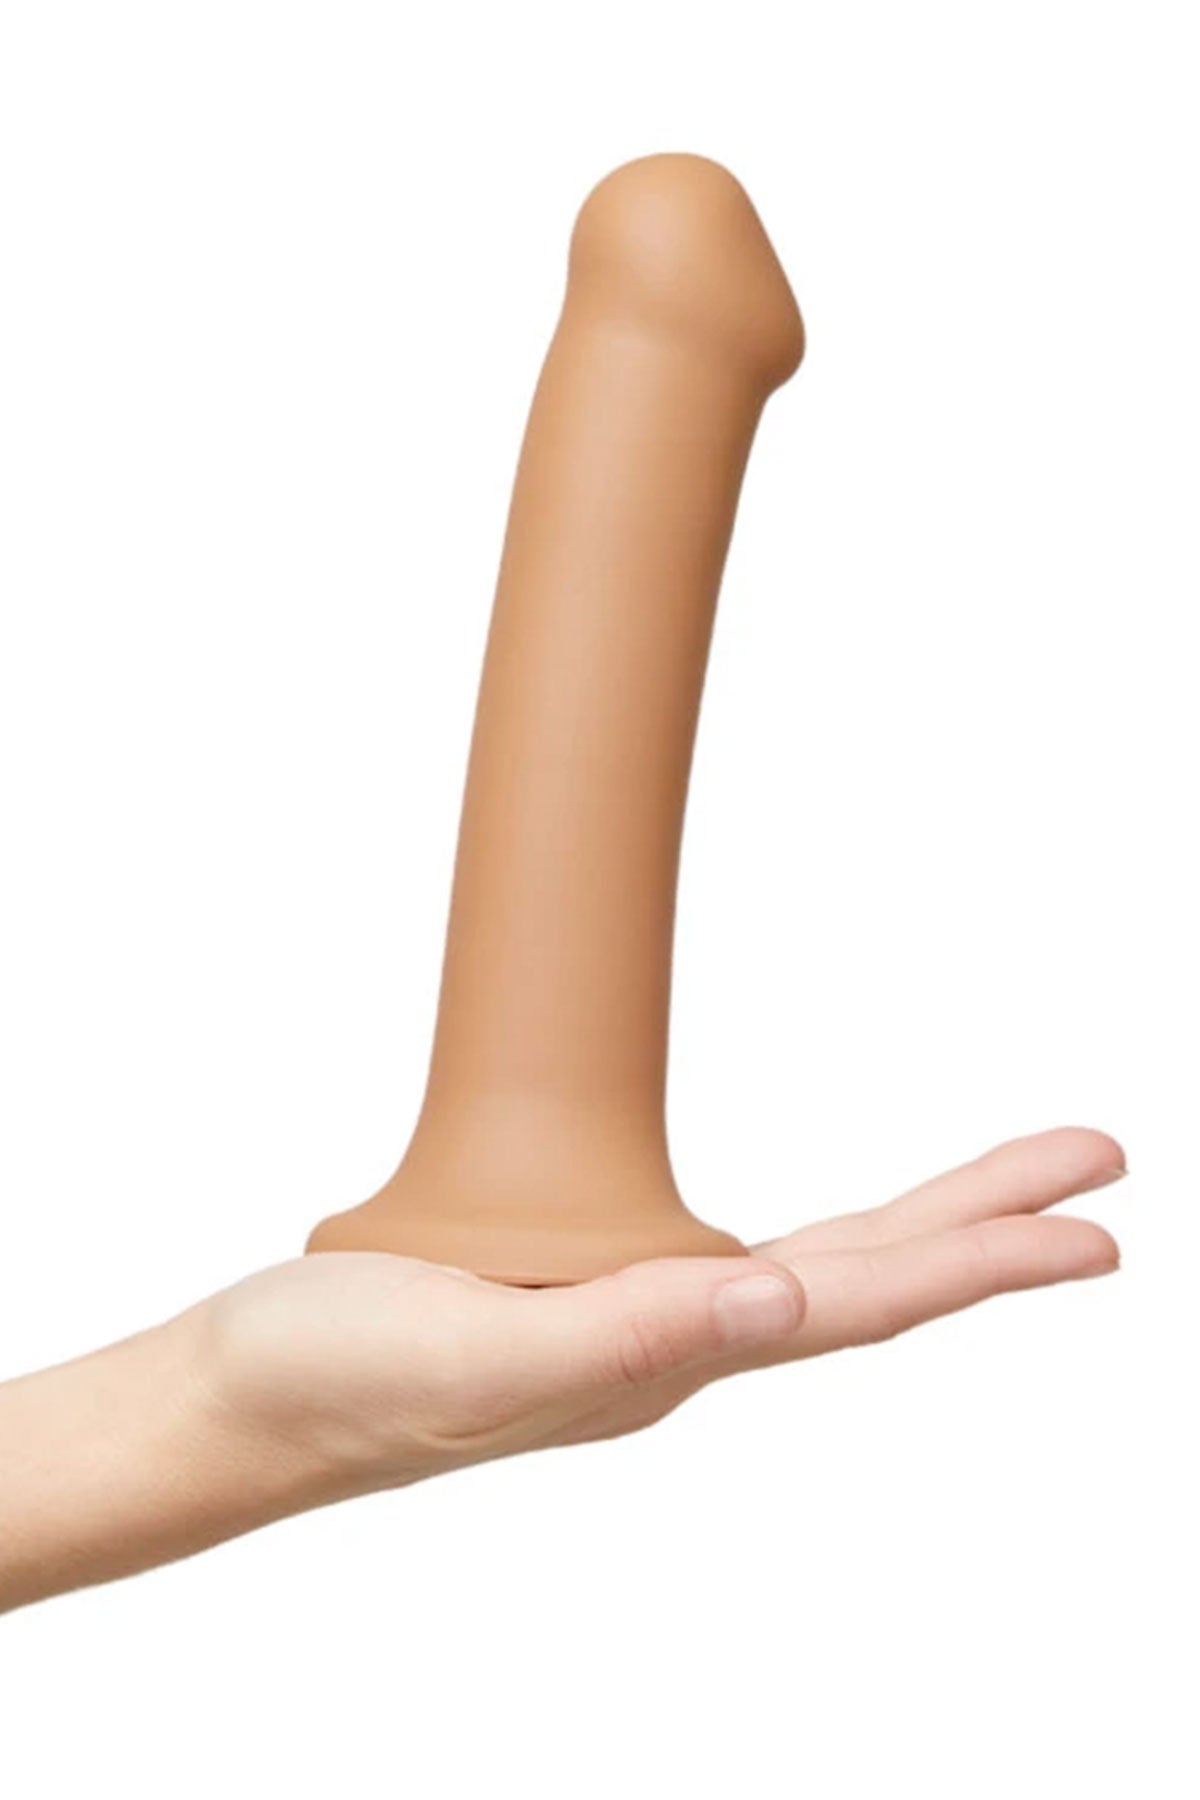 Double Density Bendable Dildo by Strap-On-Me